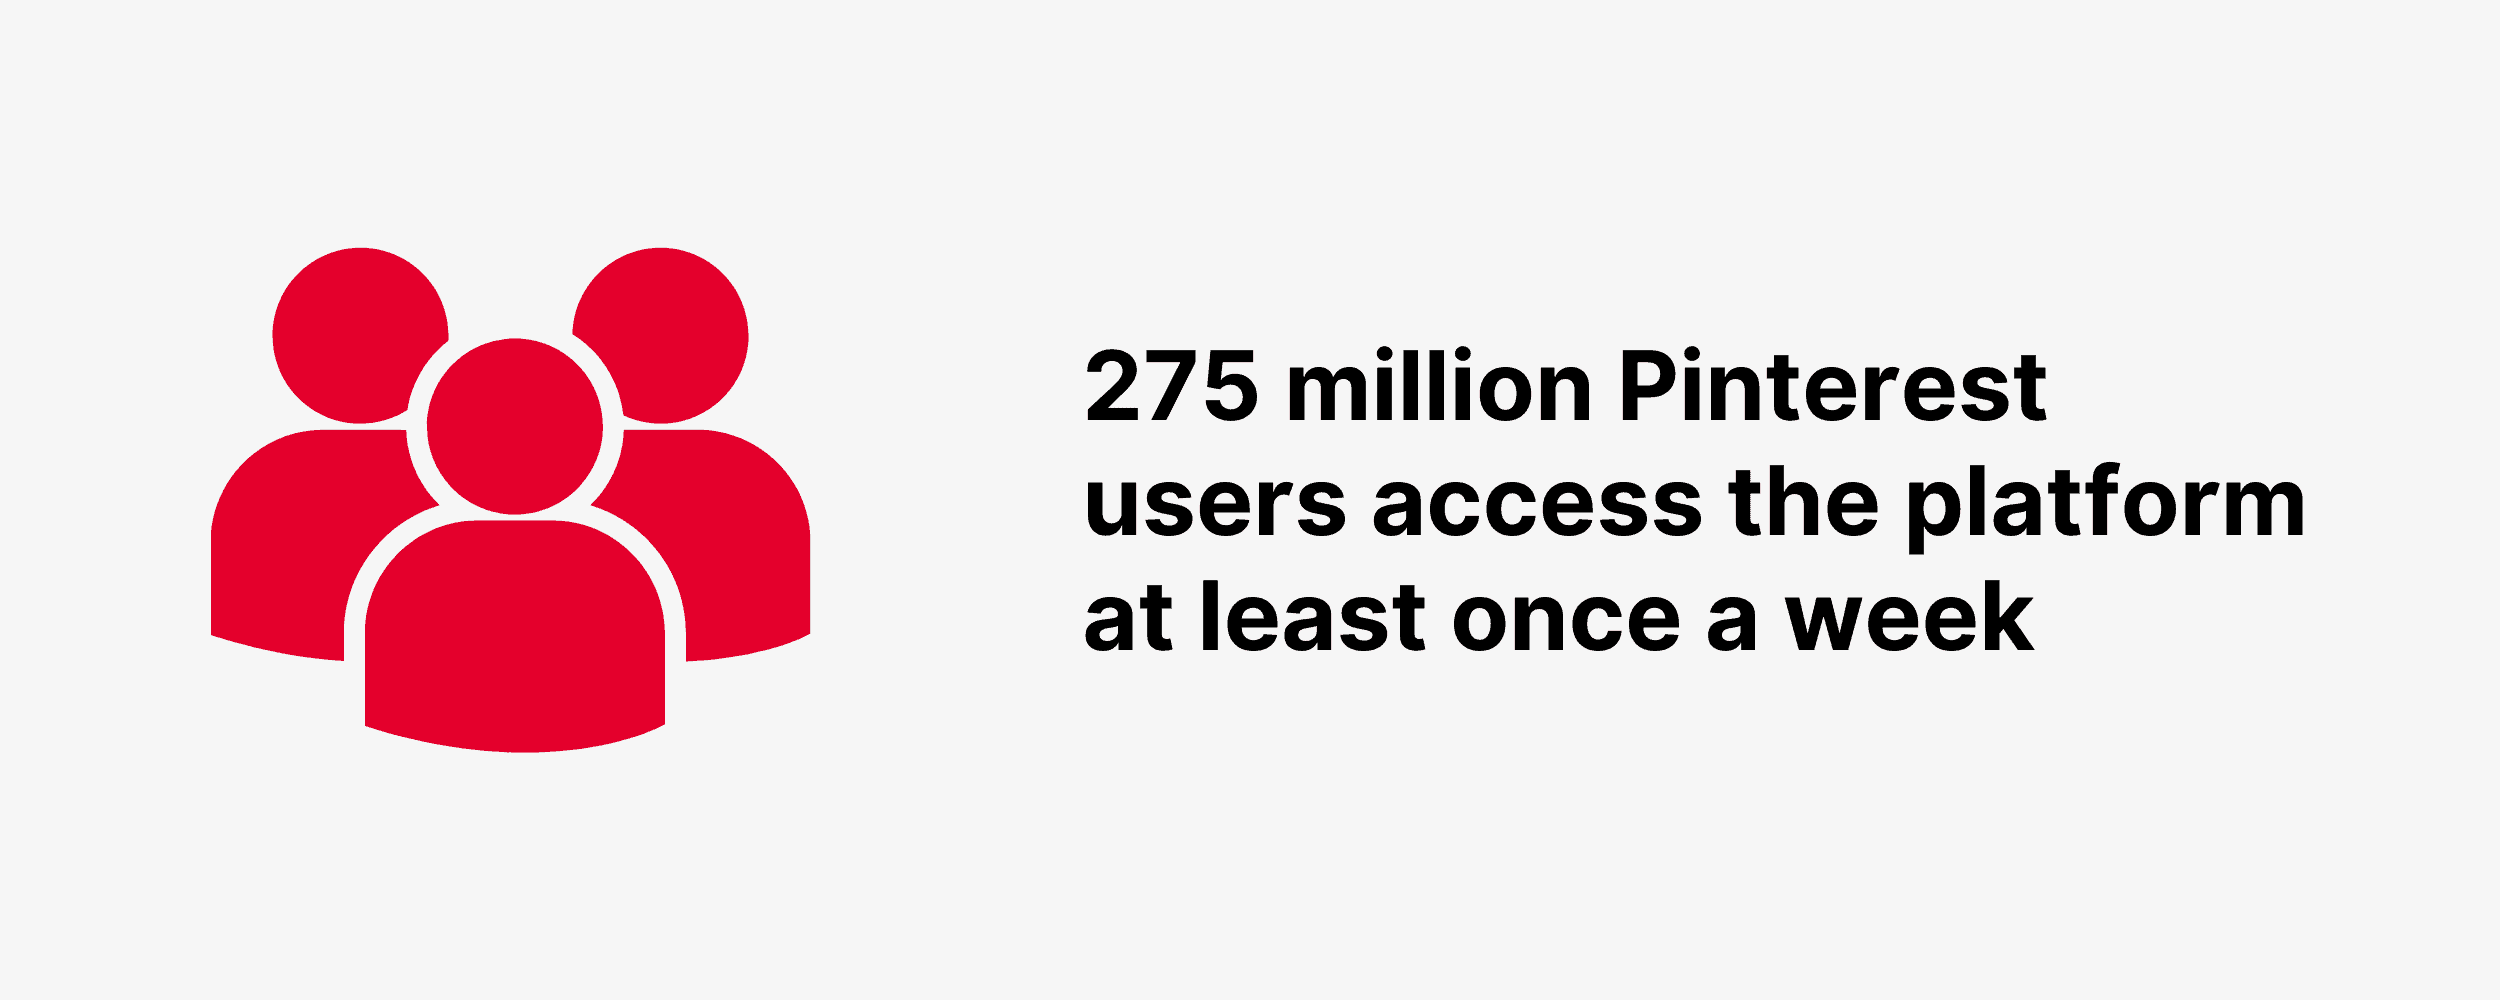 275 million Pinterest users access the platform at least once a week